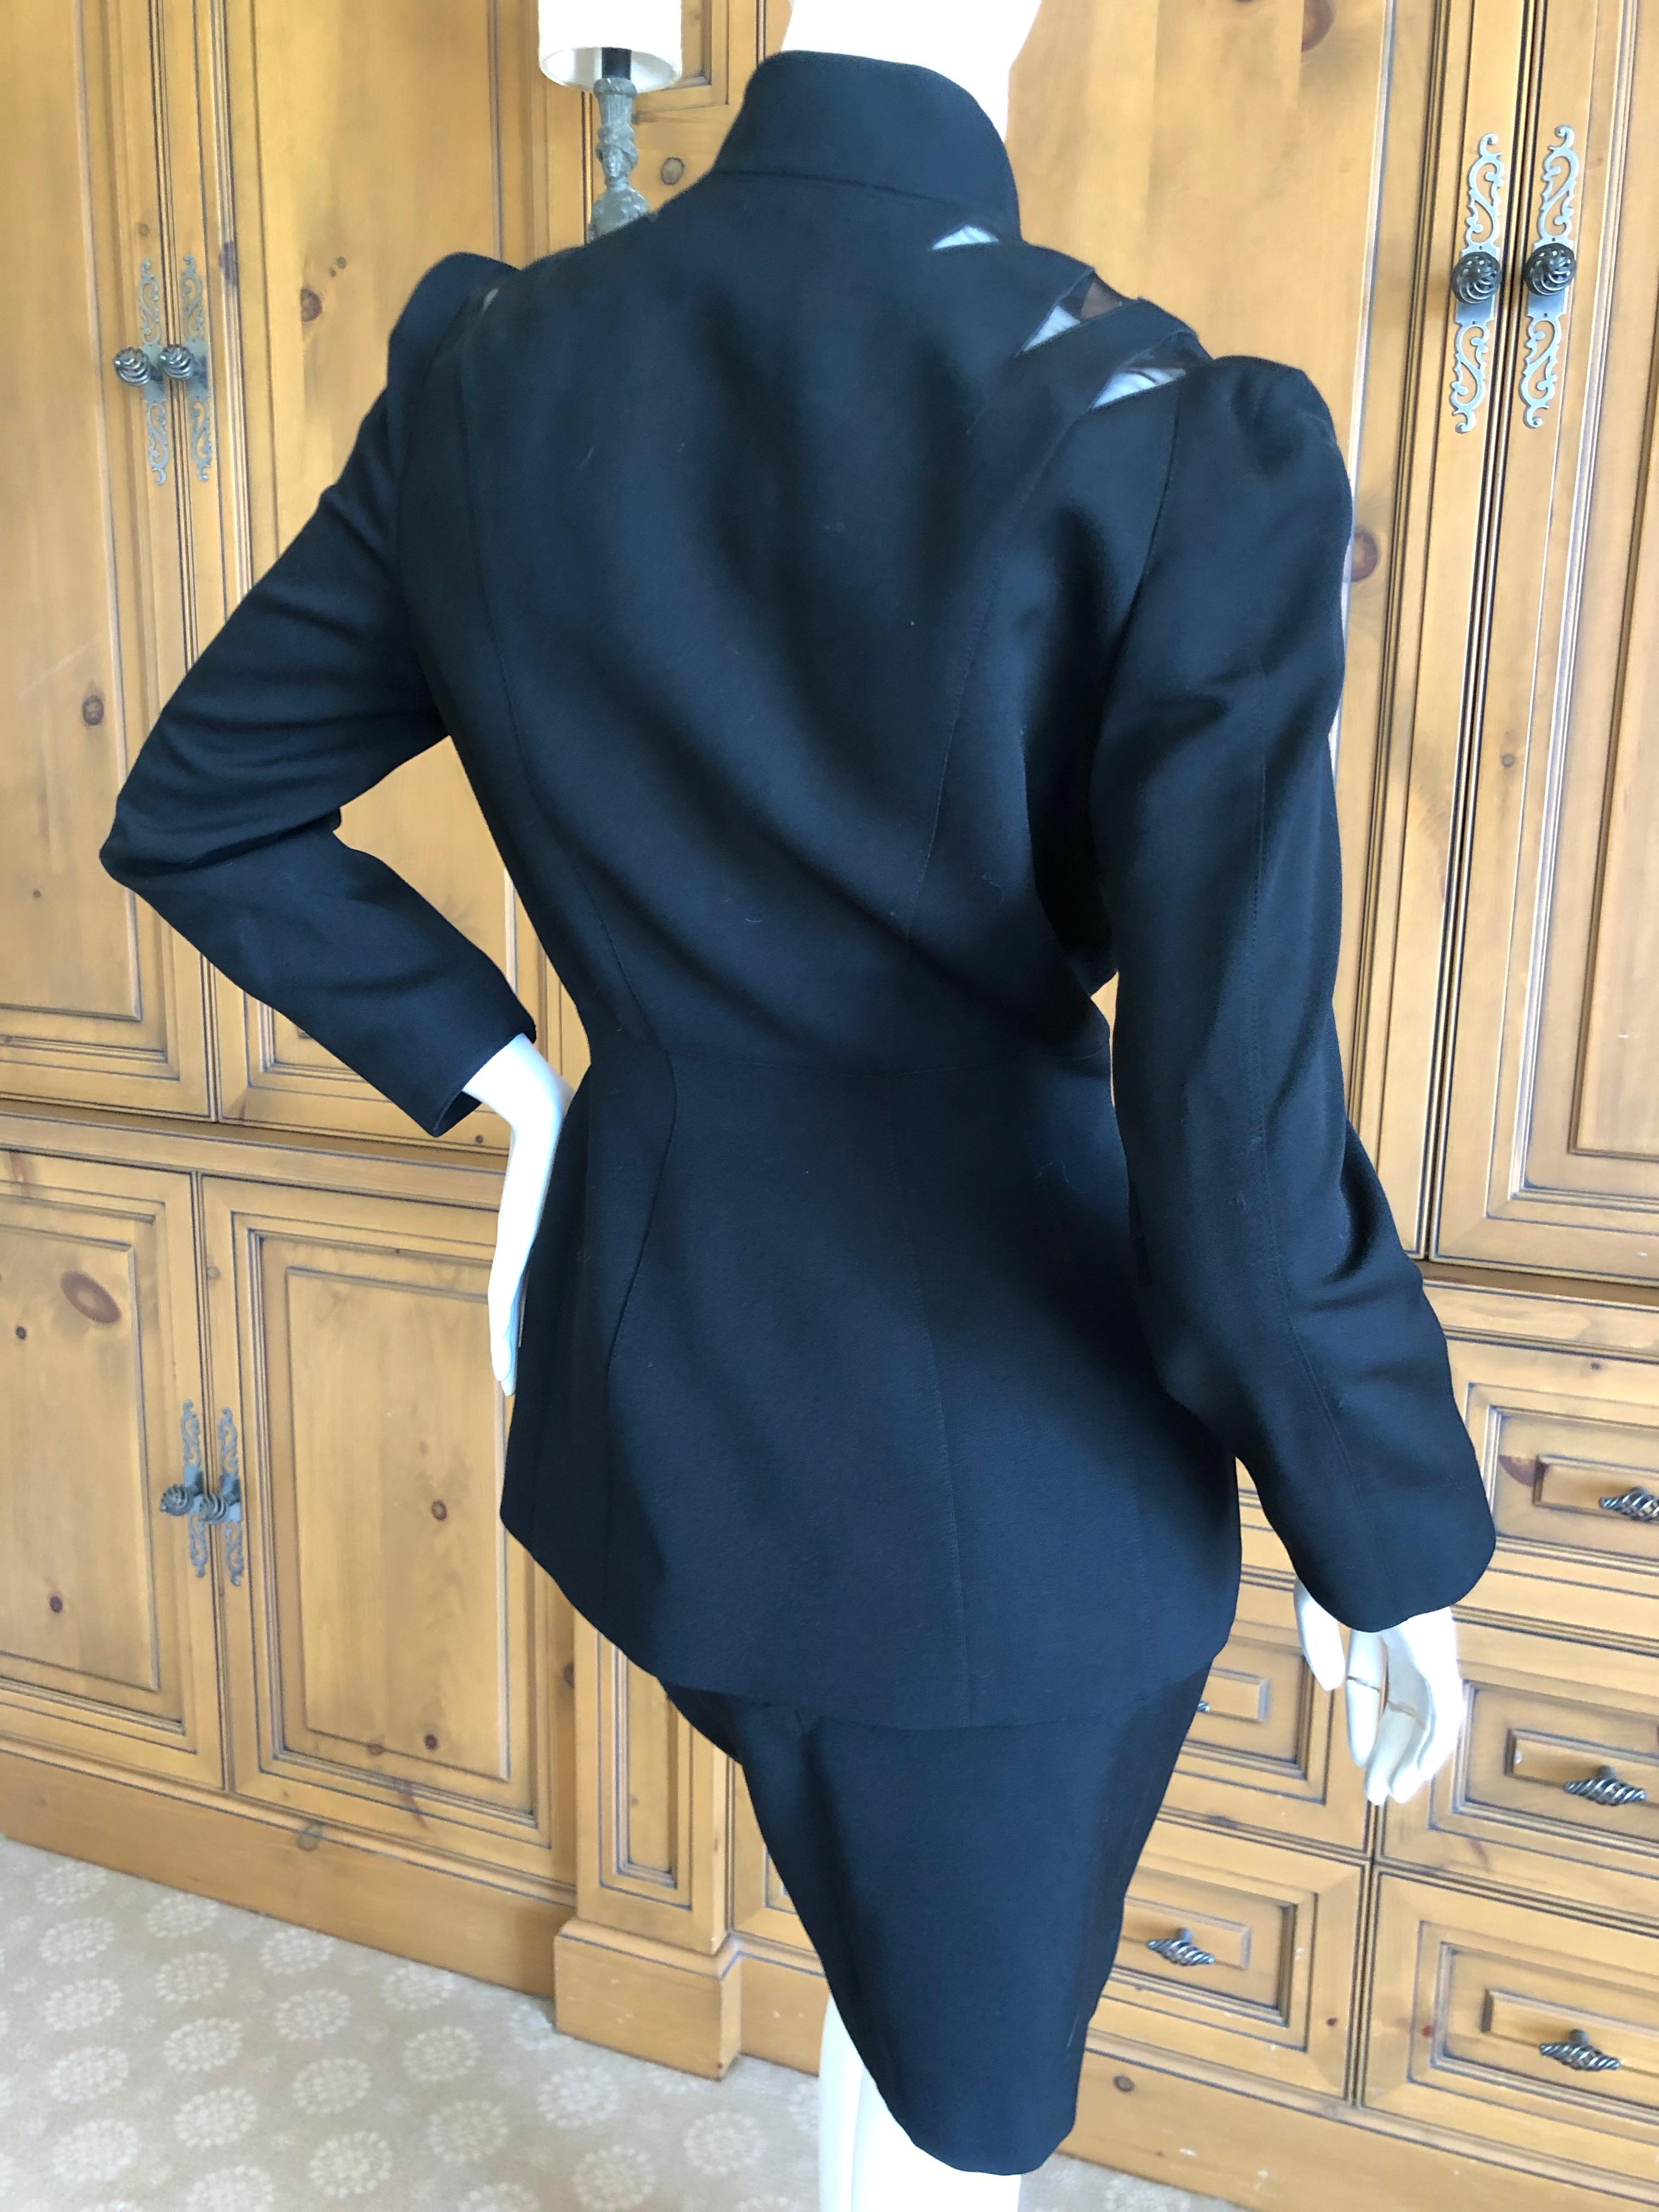 Thierry Mugler Vintage 1980's Black Peplum Suit with Sheer Flame Pattern Details For Sale 5